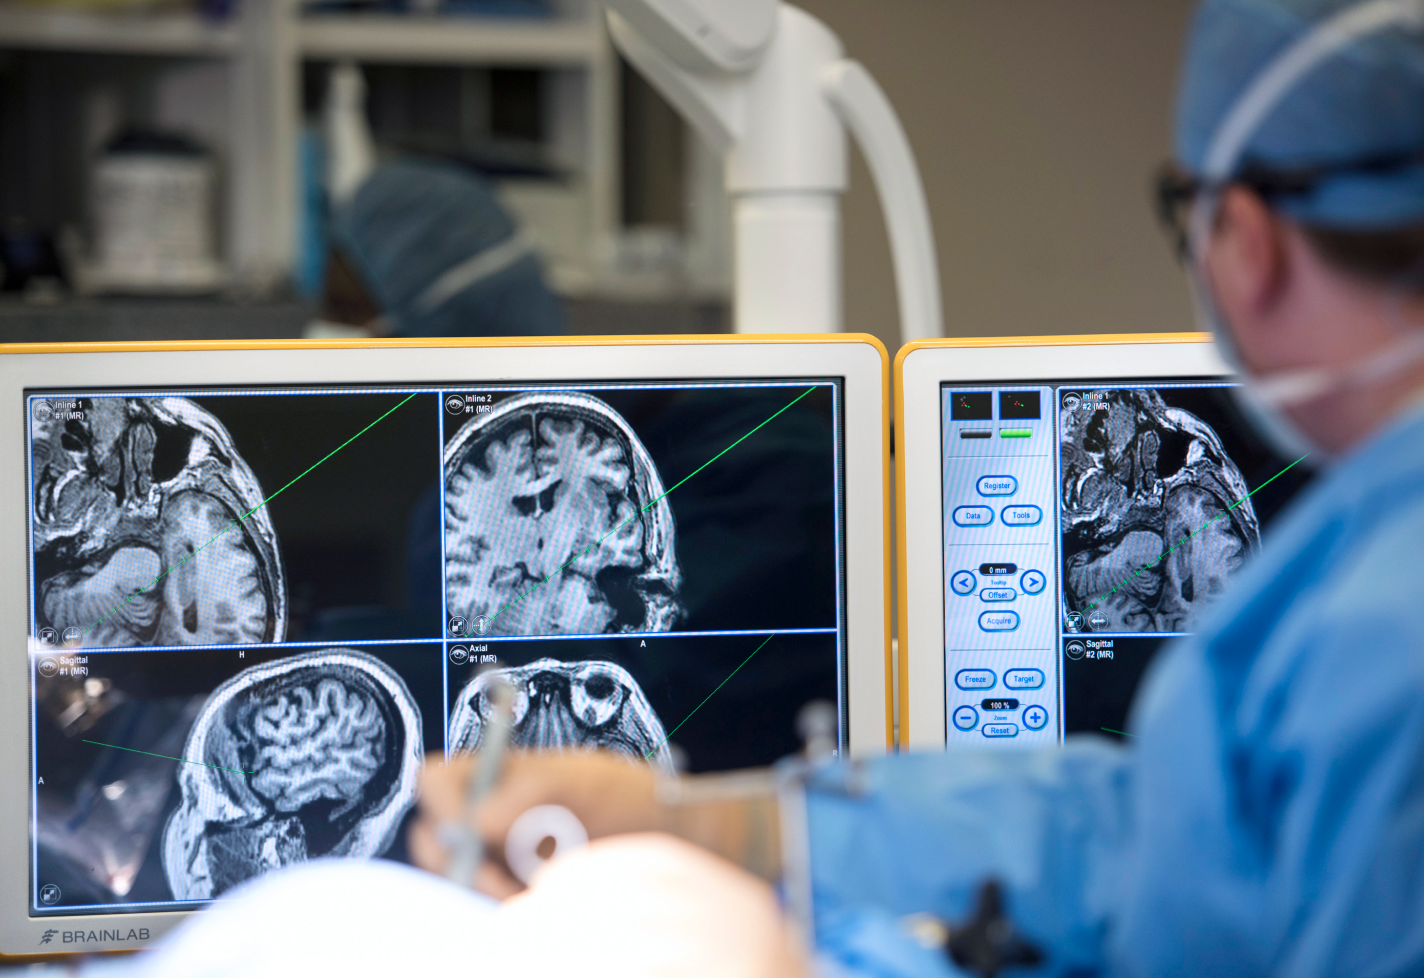 A brain surgeon looks at monitors while performing a procedure in the operating room.